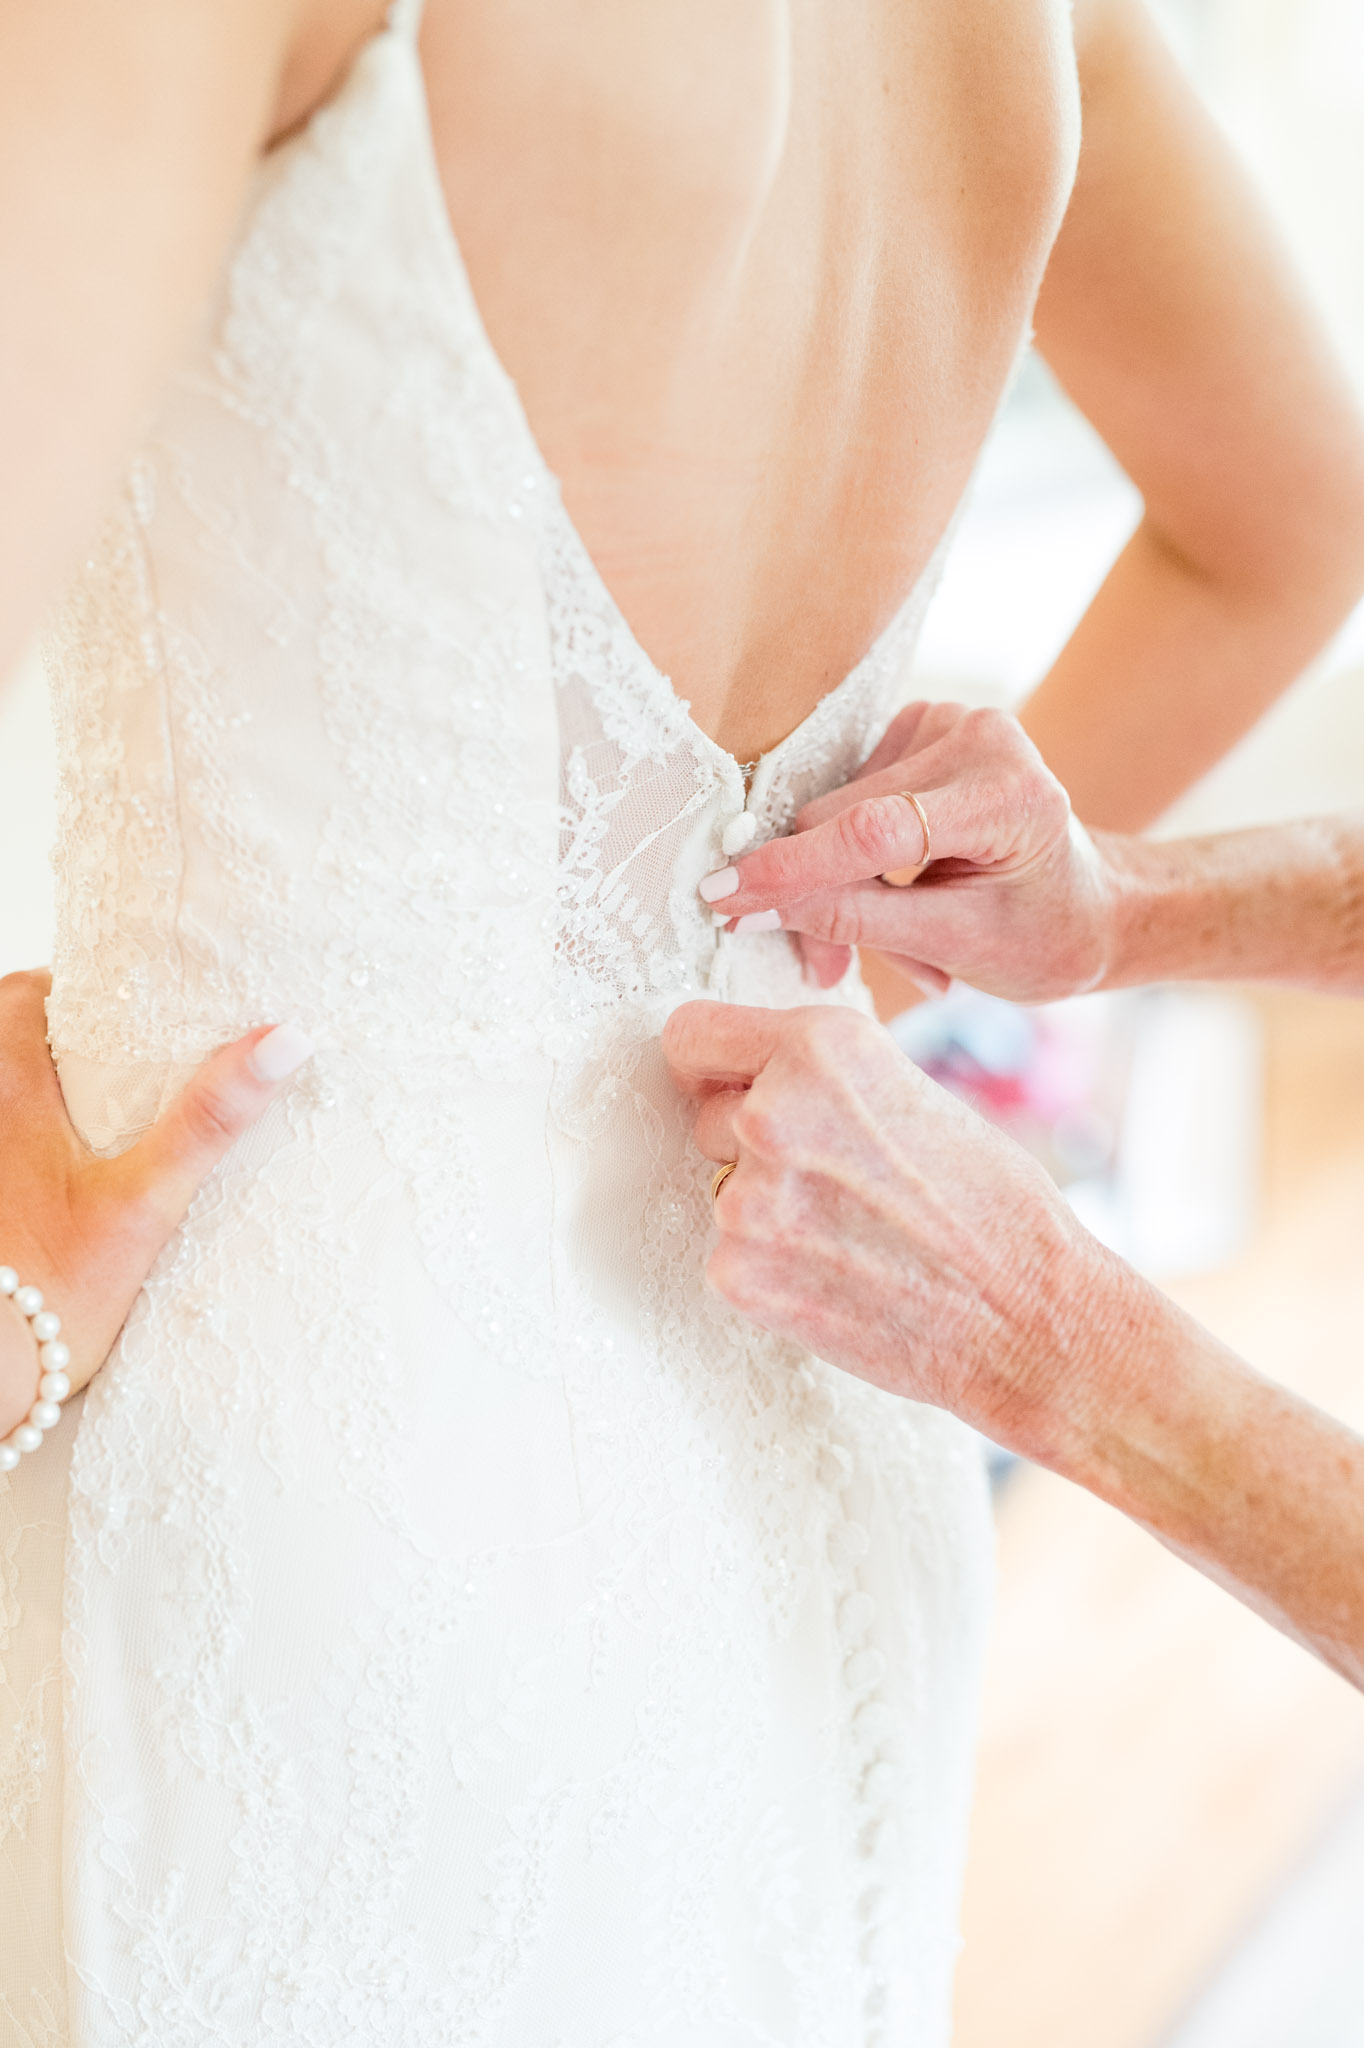 Mom buttons up bride's dress.